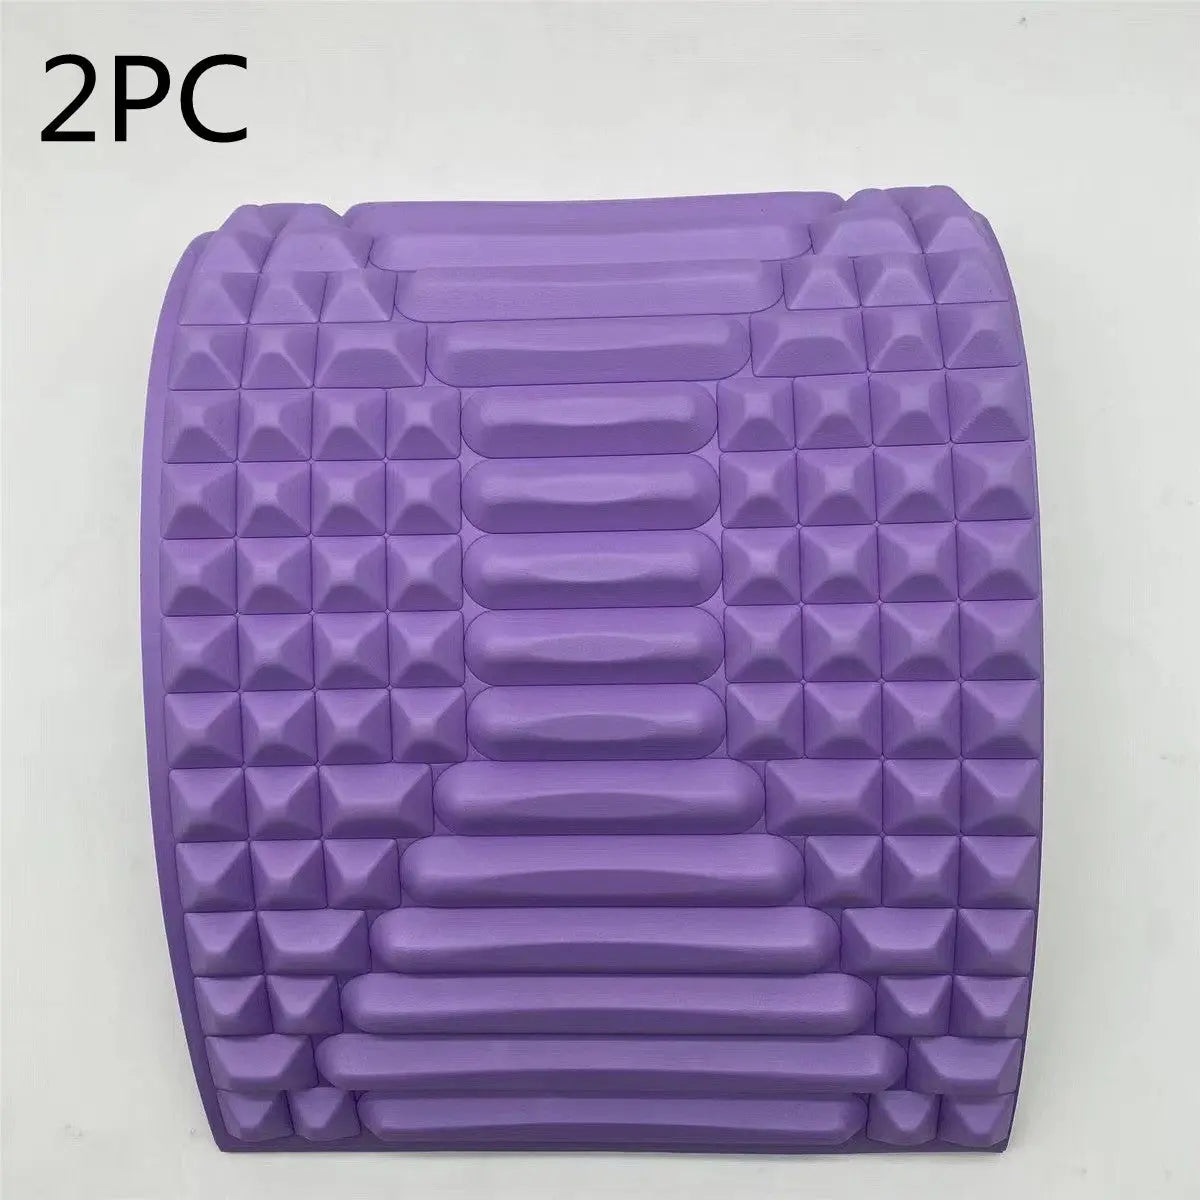 Back Stretcher Pillow Neck Lumbar Support Massager For Neck Waist Back Sciatica Herniated Disc Pain Relief Massage Relaxation - Trending's Arena Beauty Back Stretcher Pillow Neck Lumbar Support Massager For Neck Waist Back Sciatica Herniated Disc Pain Relief Massage Relaxation Body Slimmer Purple-2PC